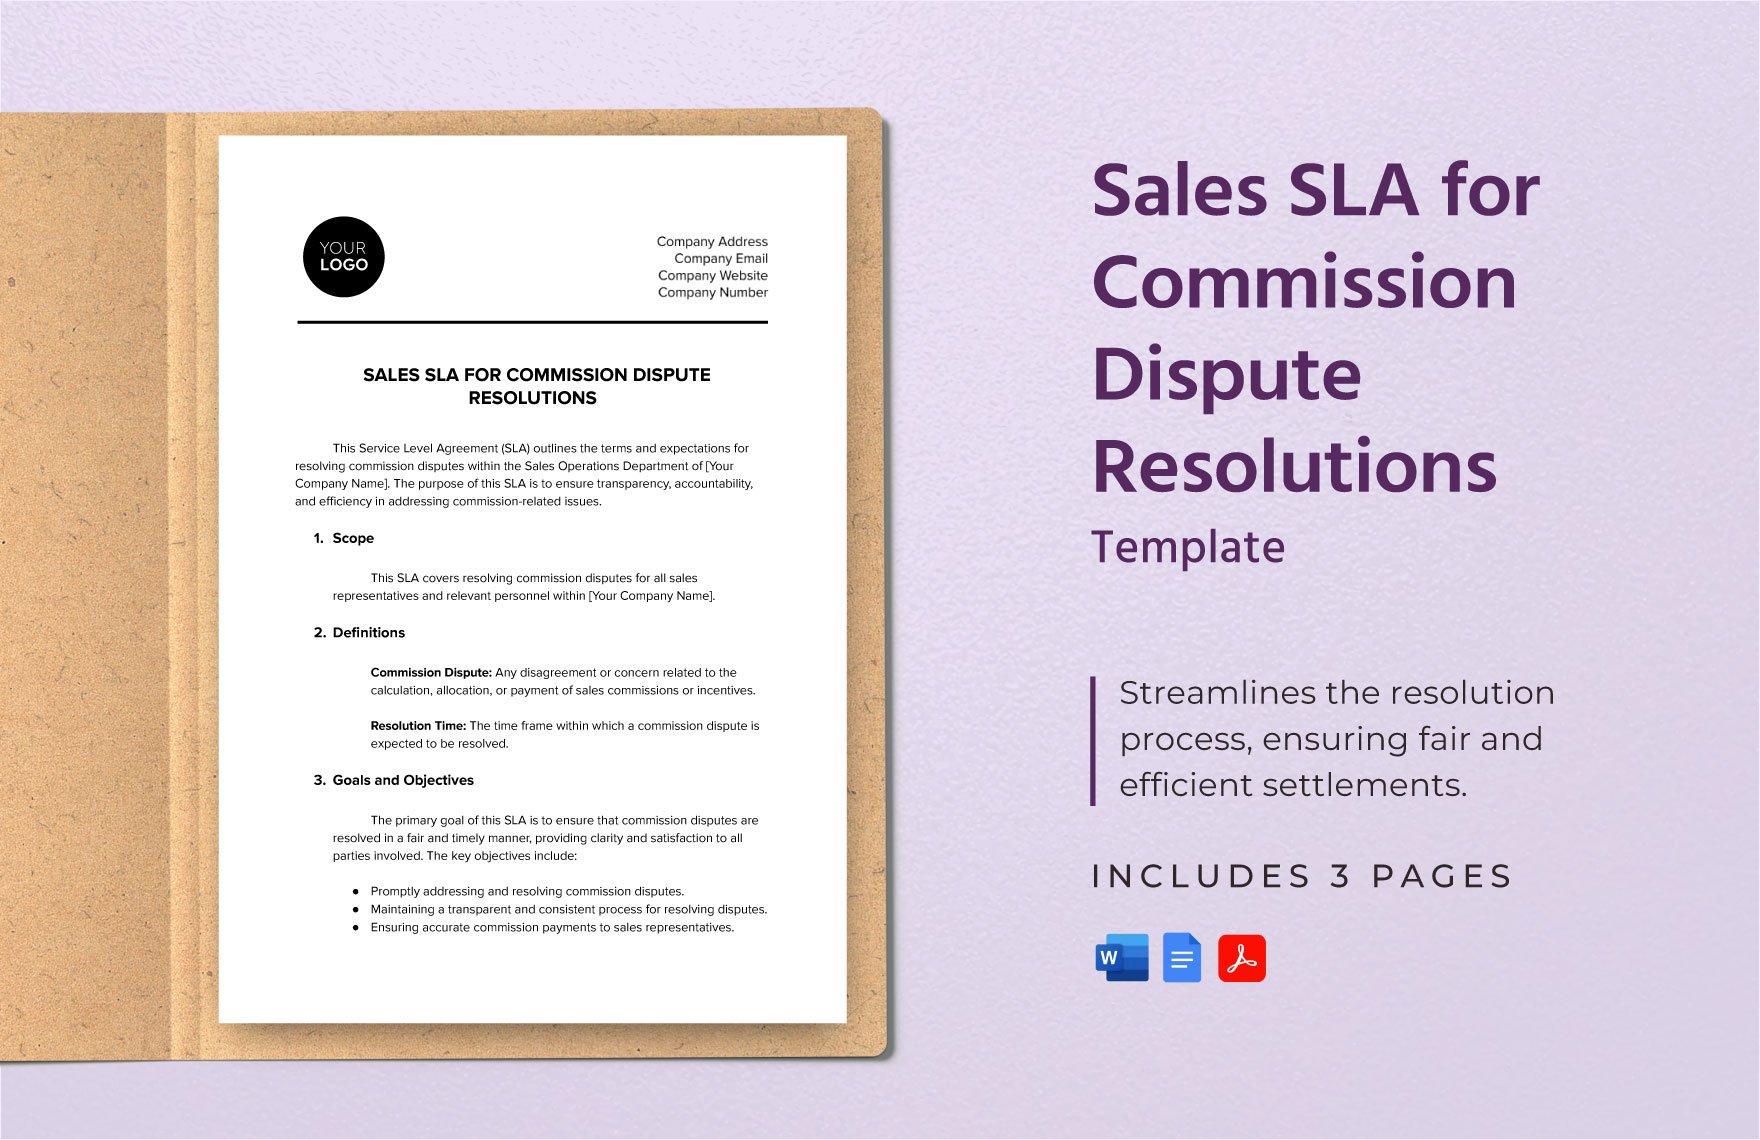 Sales SLA for Commission Dispute Resolutions Template